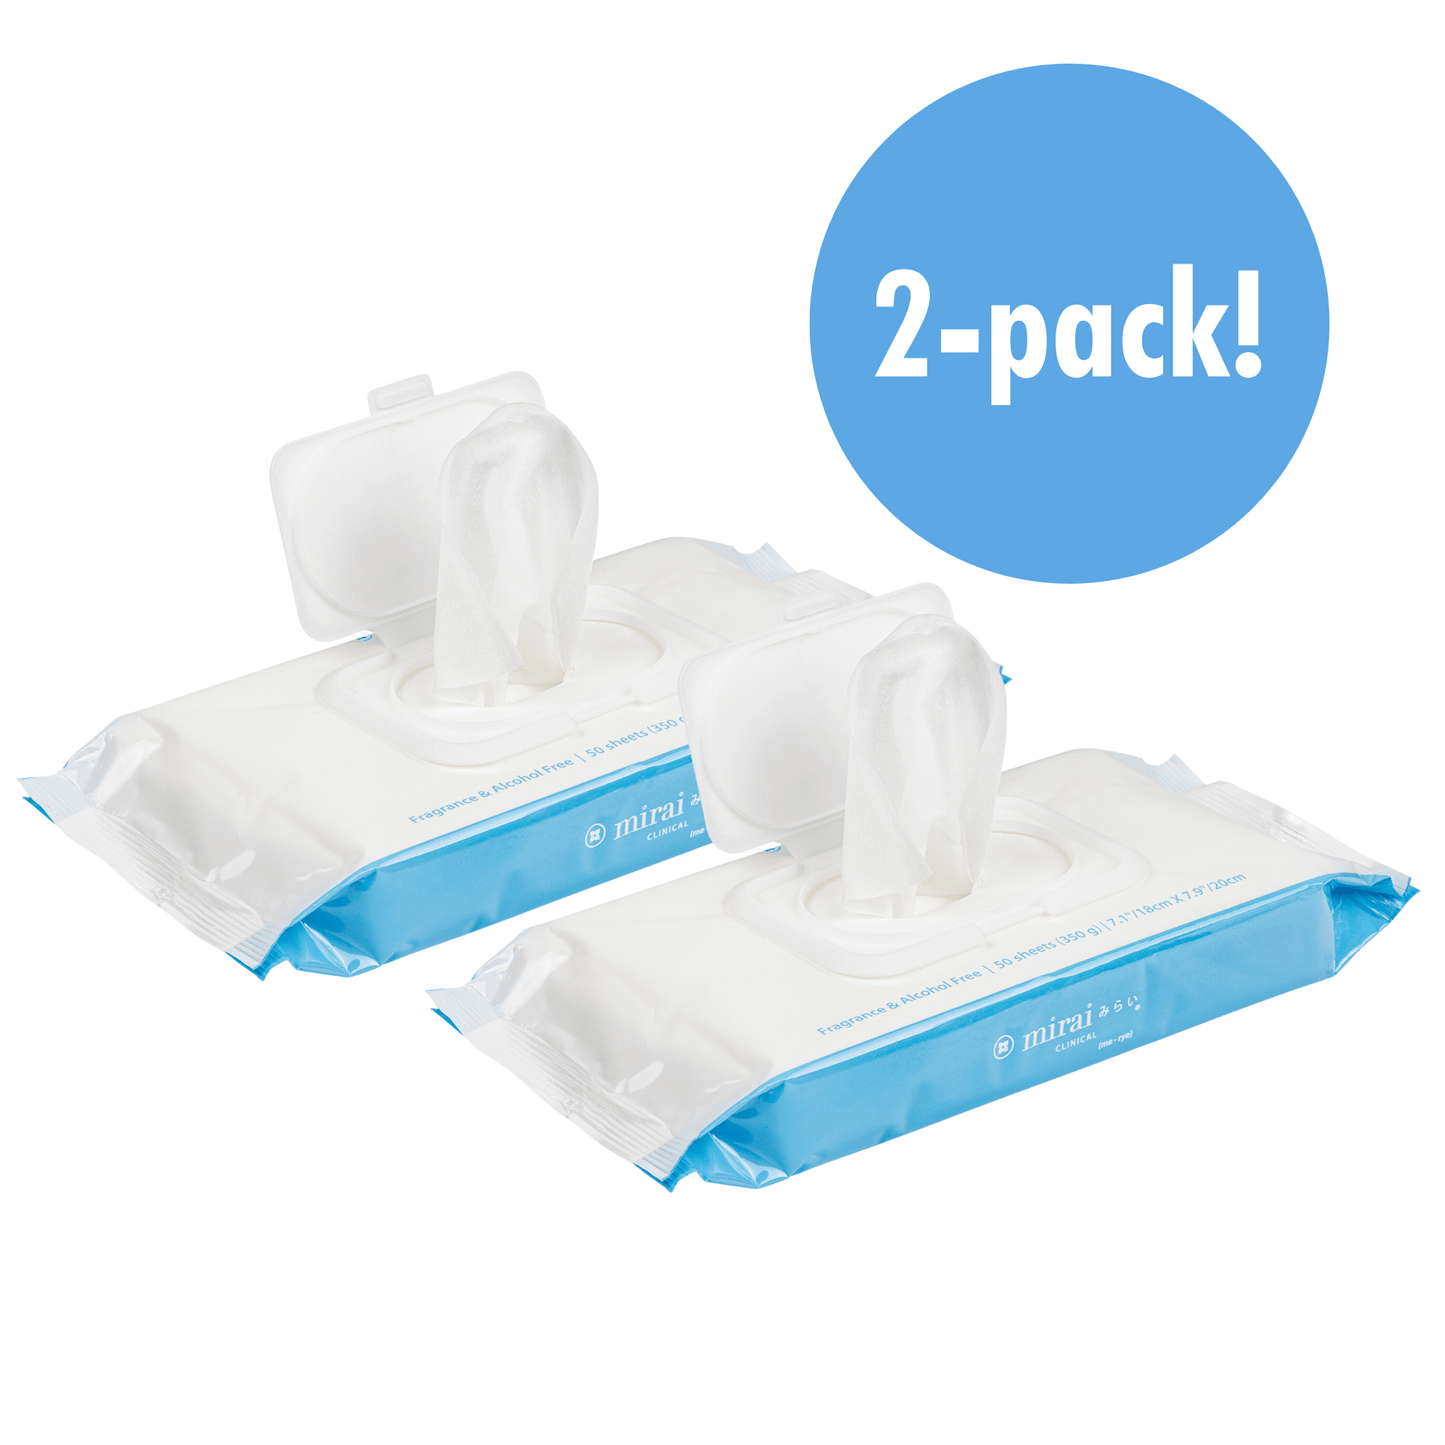 Two packs of Mirai Clinical's deodorizing body wipes, infused with persimmon extract for effective nonenal neutralization.